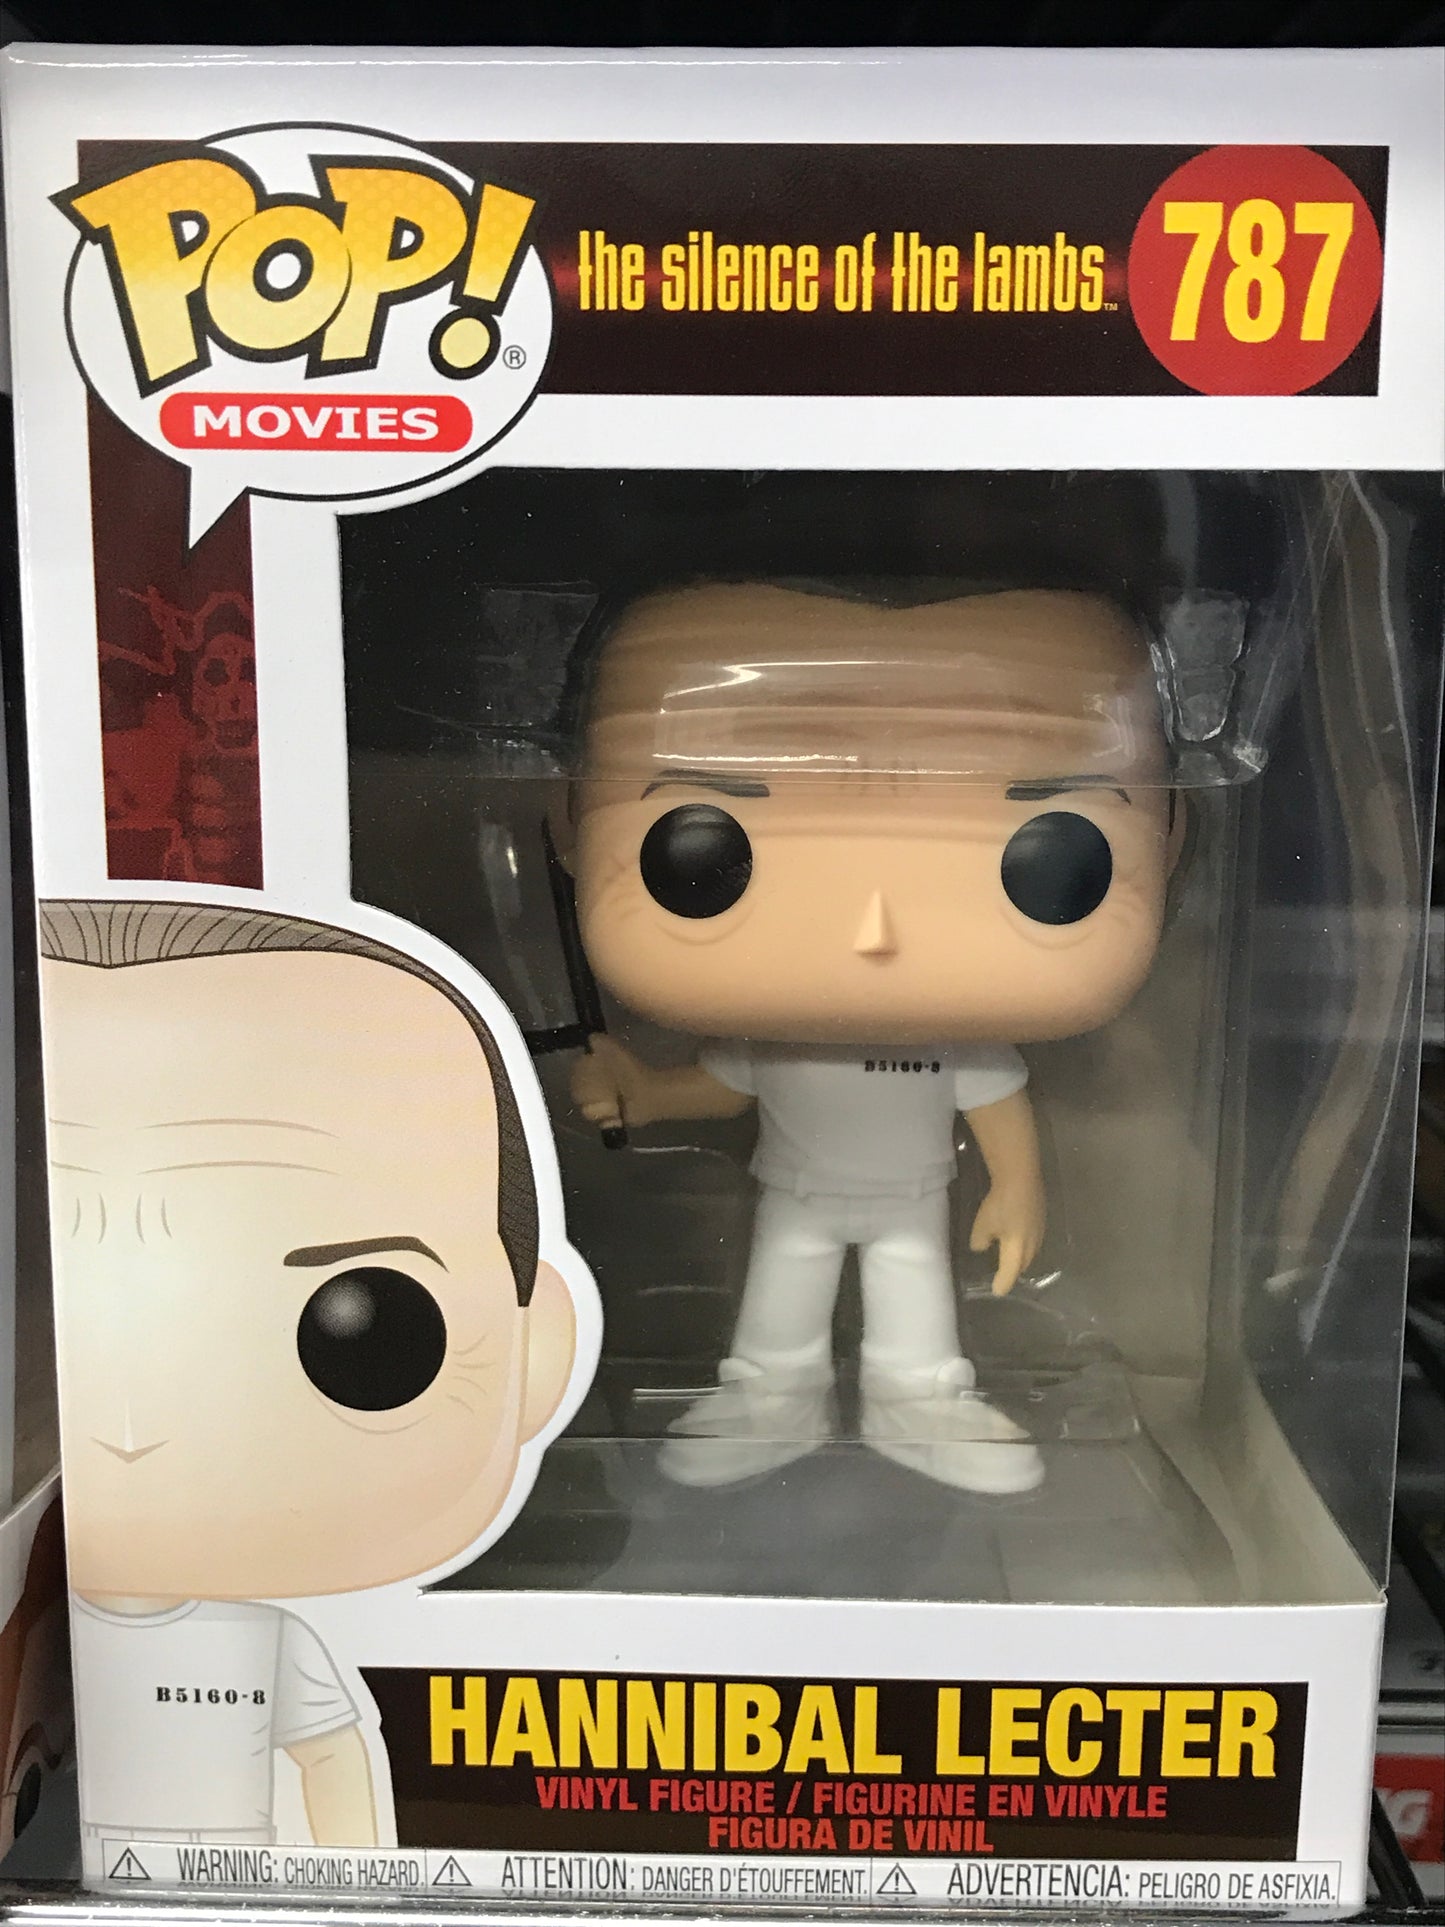 Hannibal Lecter (Silence of the Lambs) Funko Pop! Horror Movies